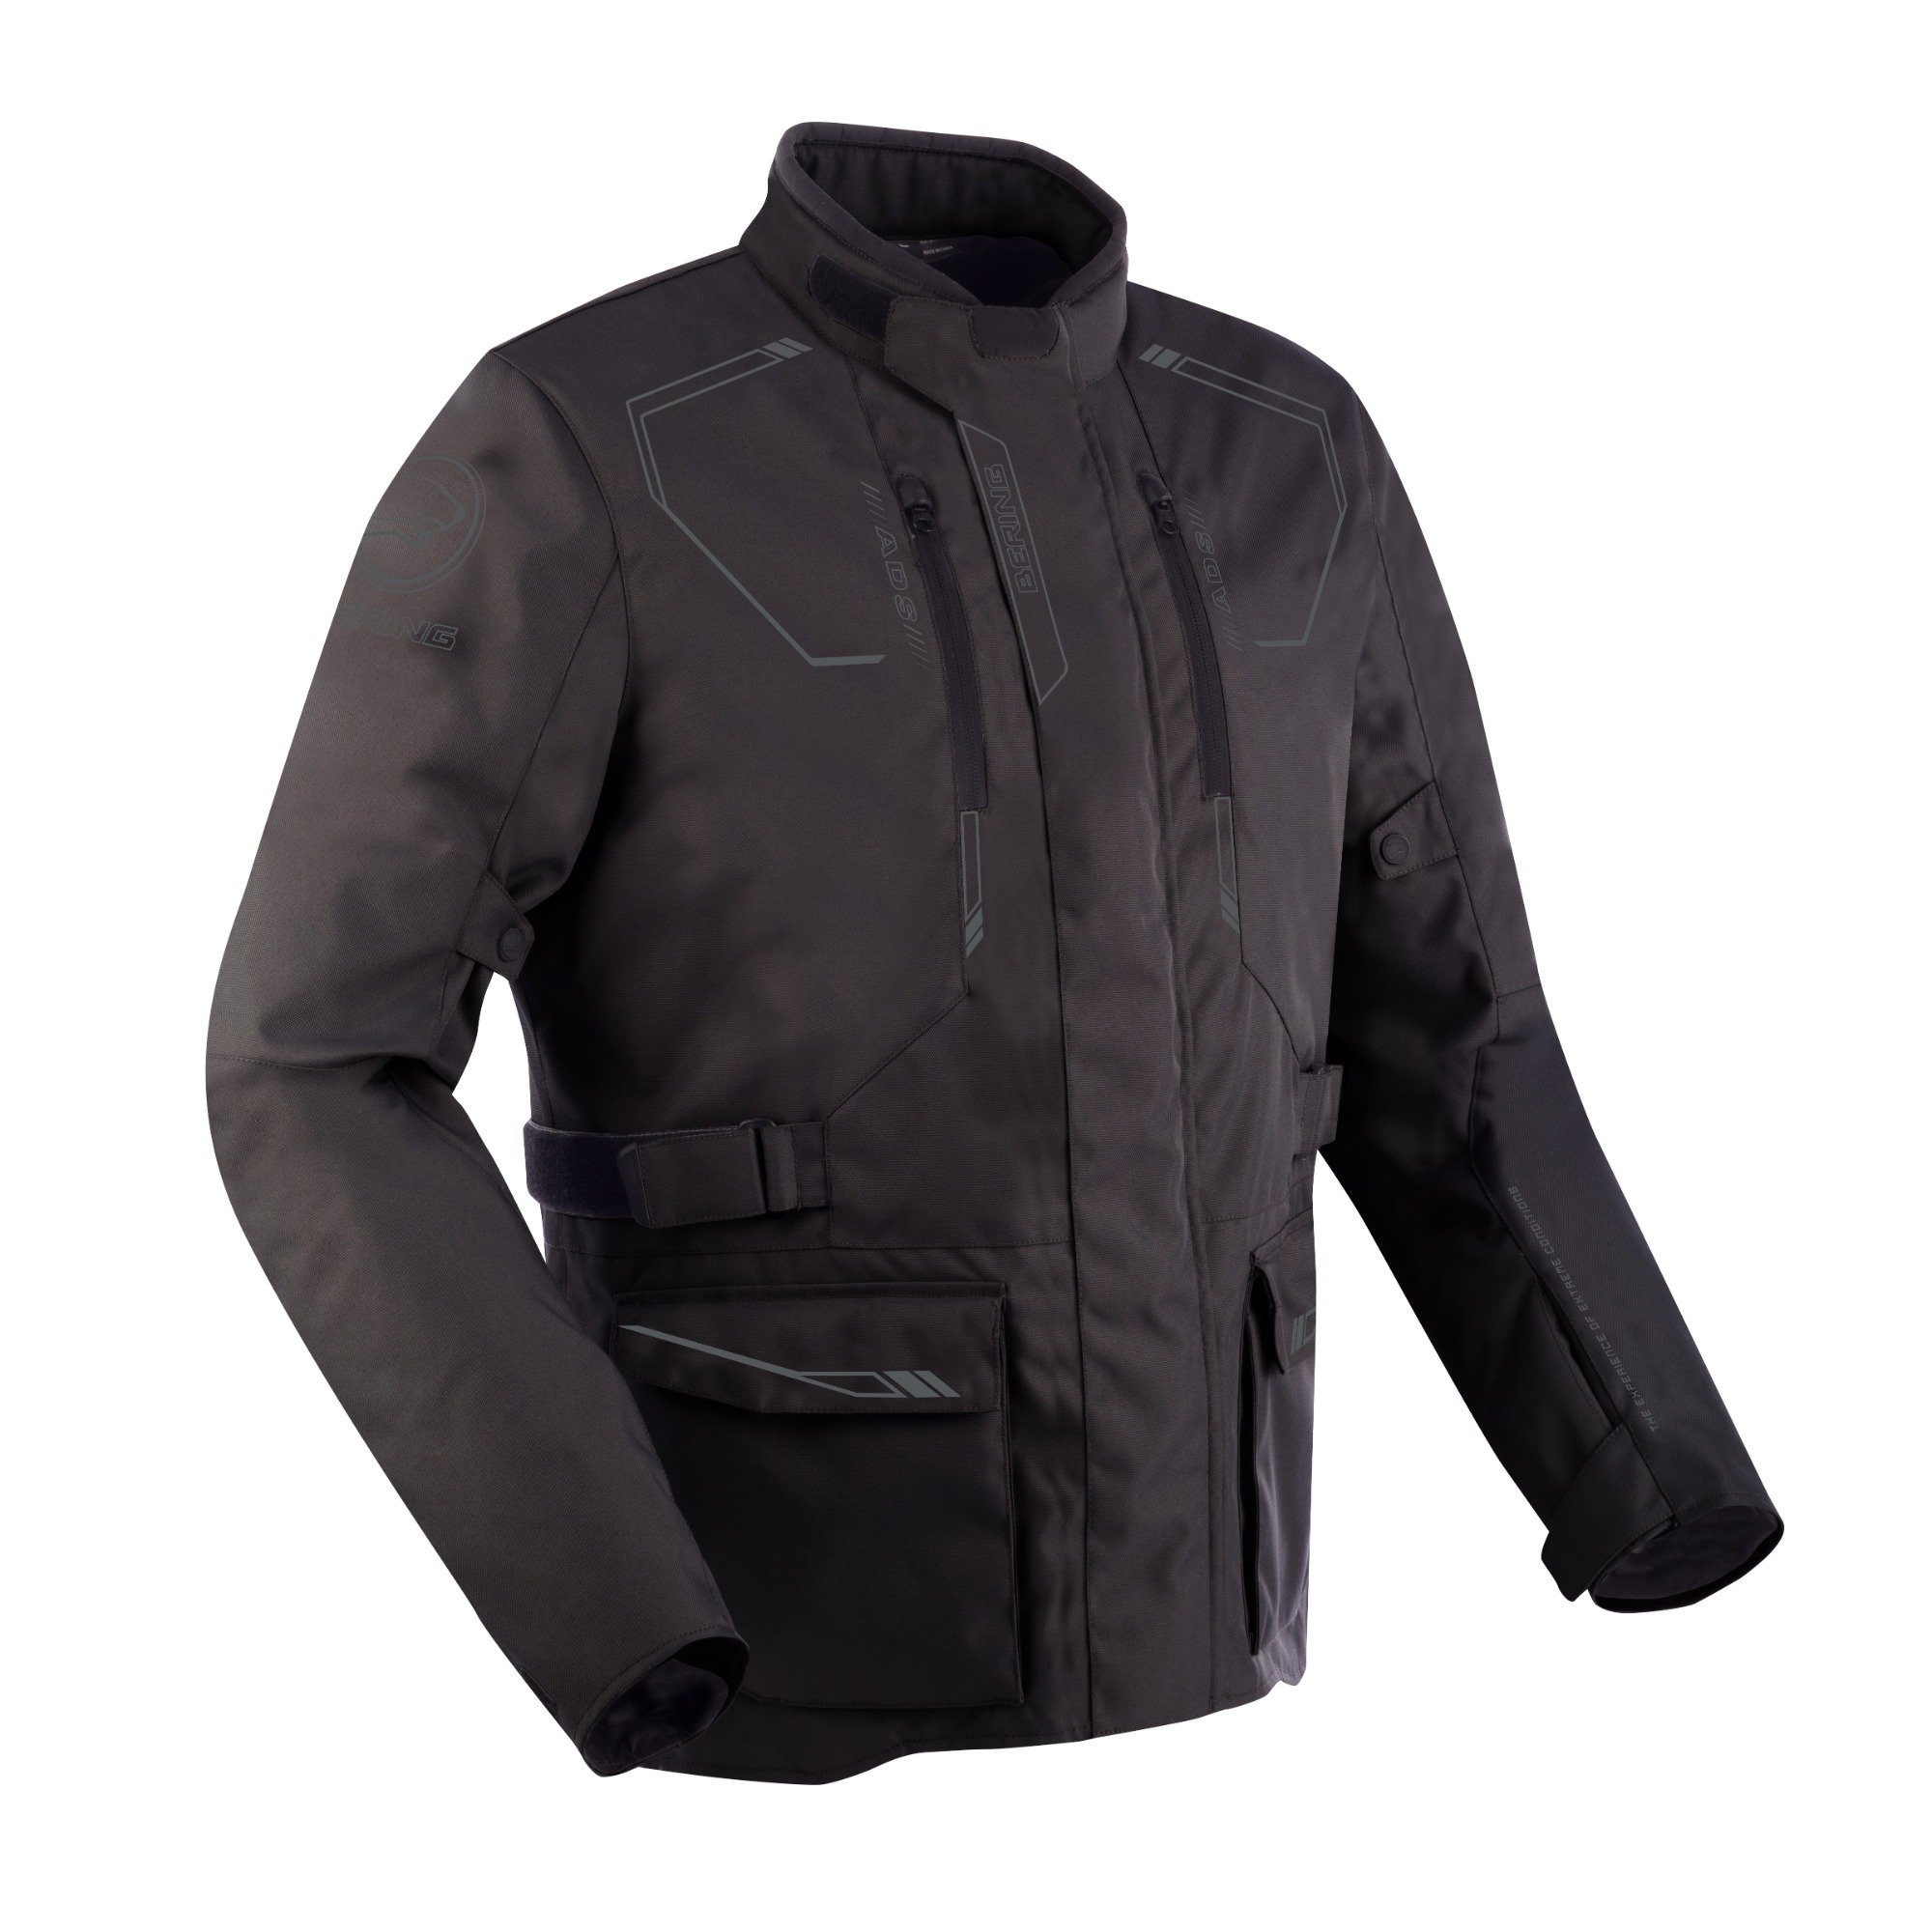 Image of Bering Voyager Jacket Black Size S ID 3660815169483